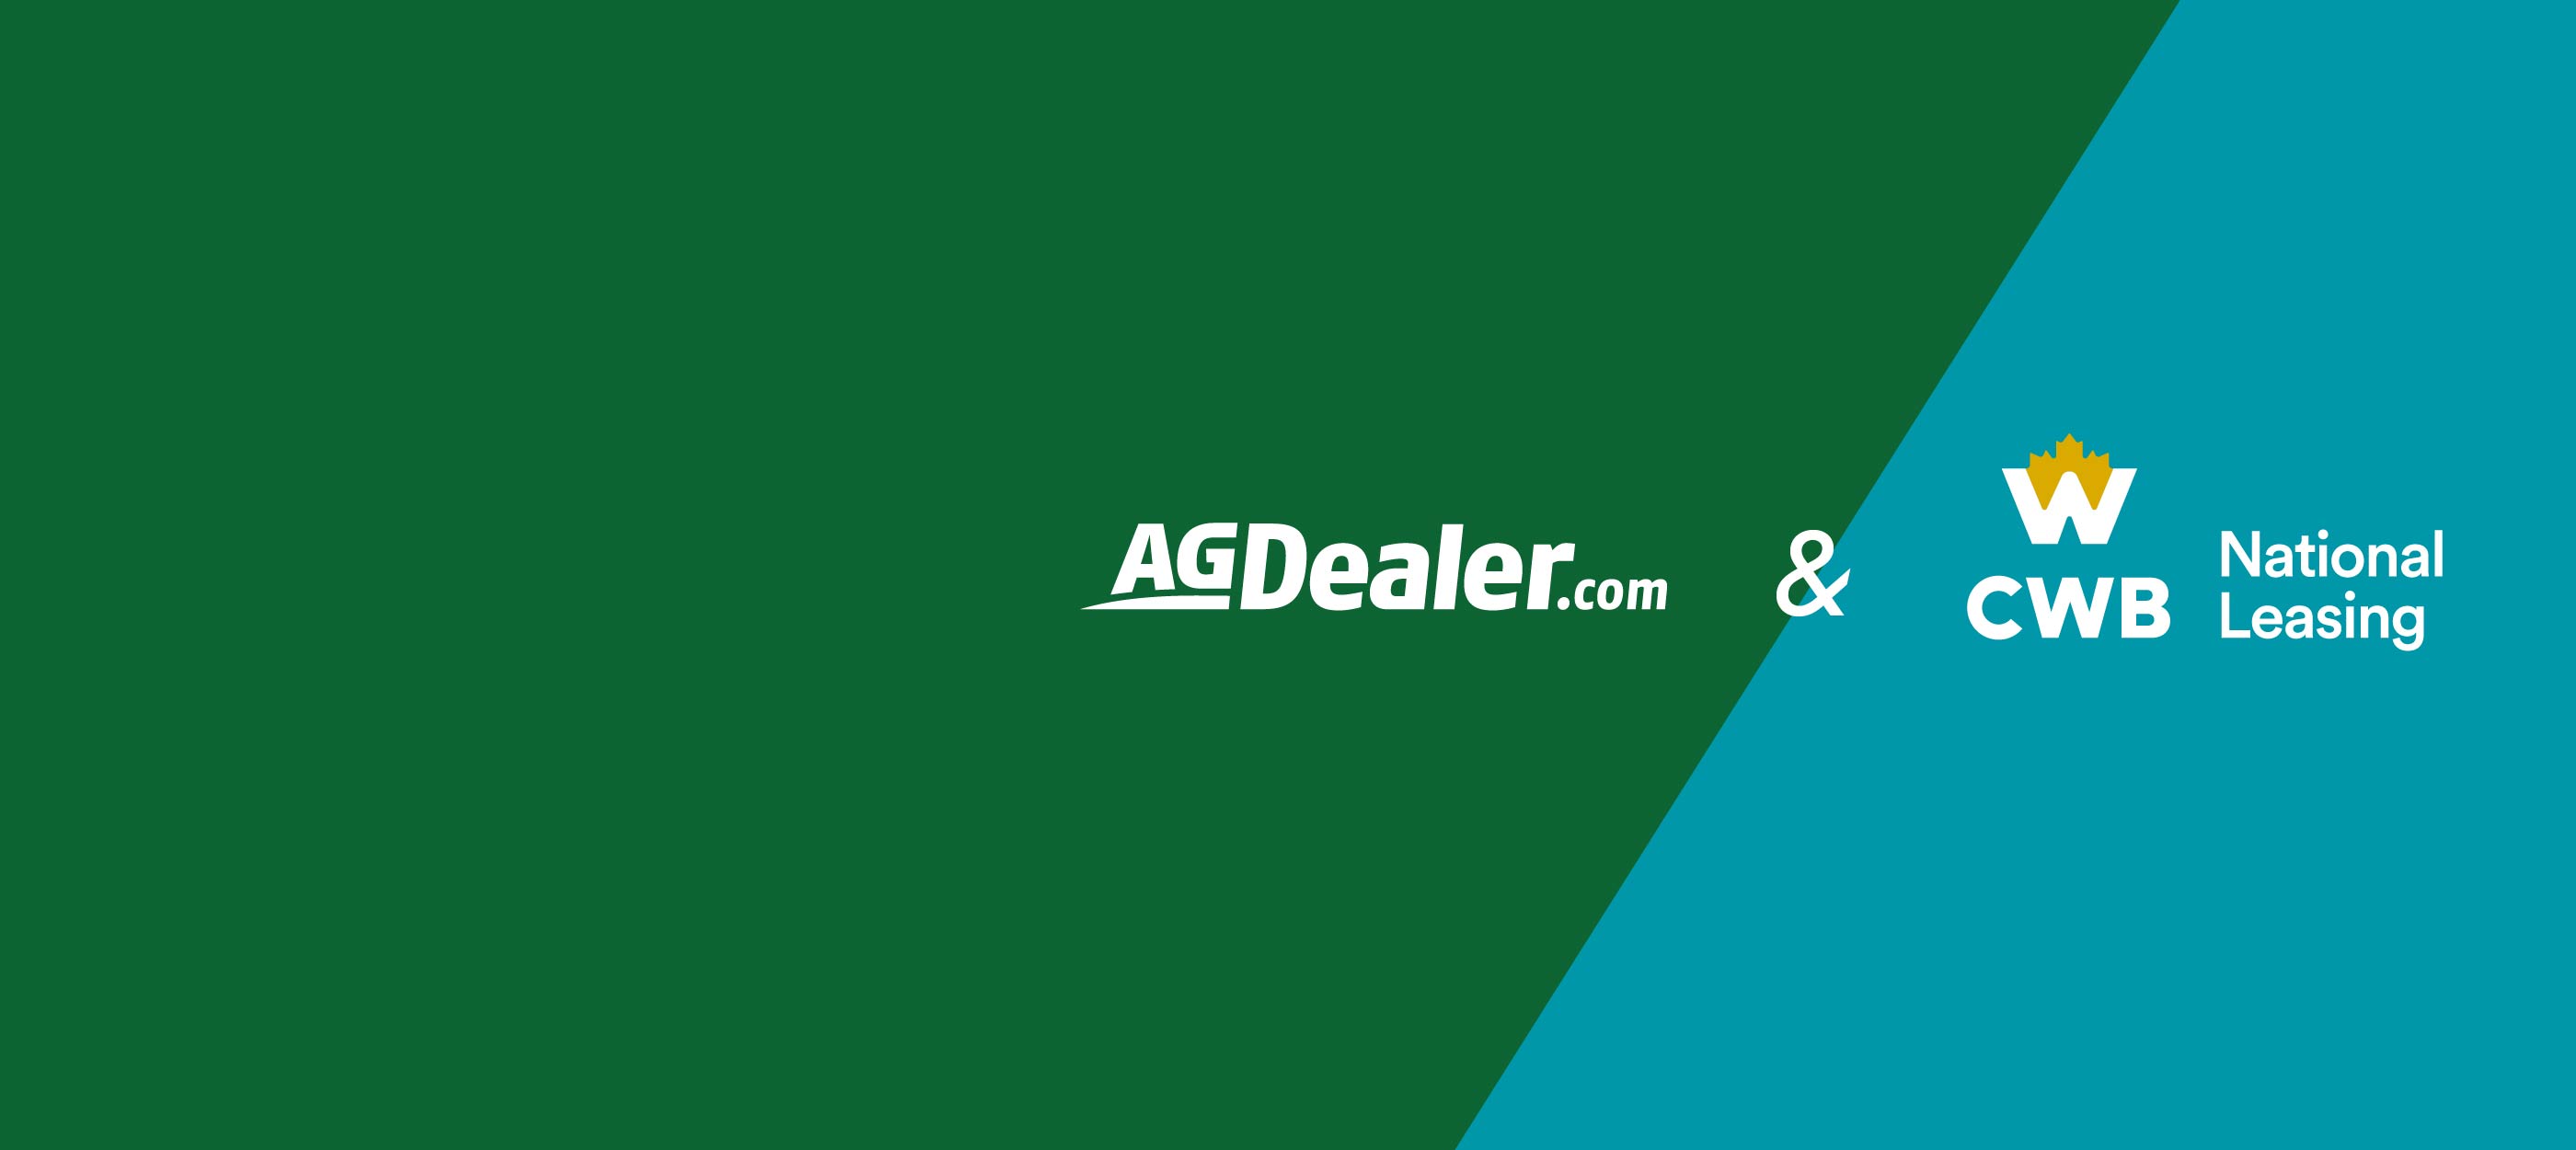 AgDealer and CWB National Leasing